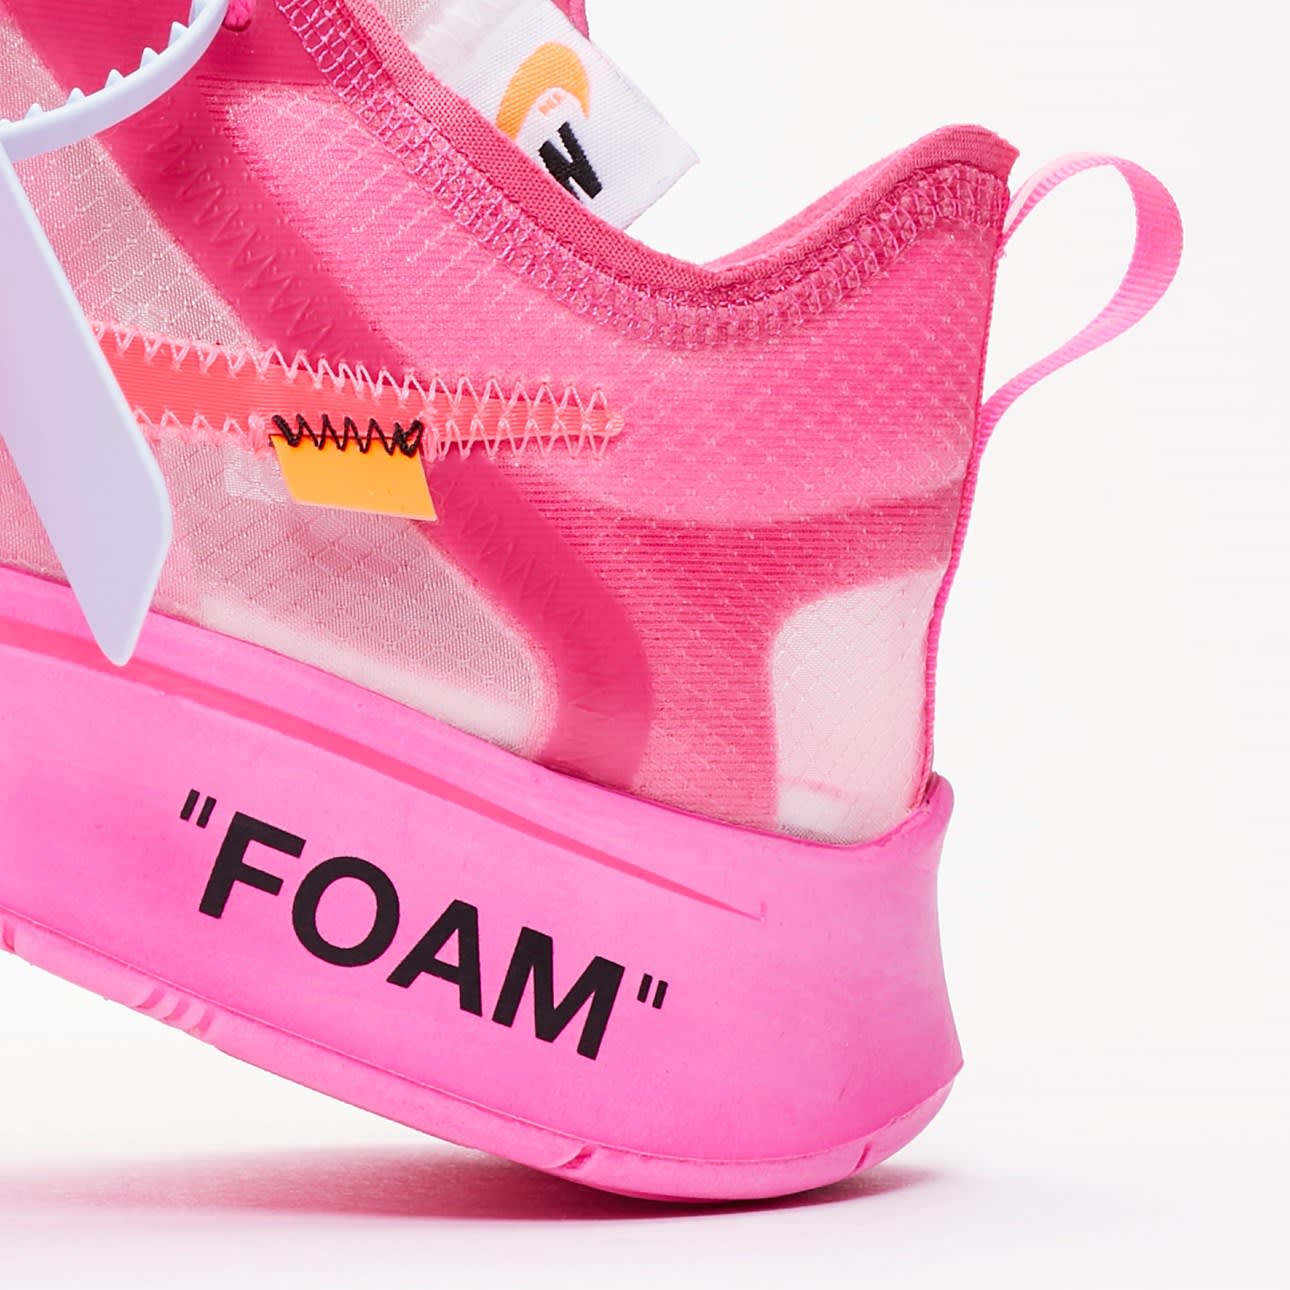 Off-White x Nike Zoom Fly SP AJ4588-600 &#x27;Tulip Pink/Racer Pink&#x27; Release Date